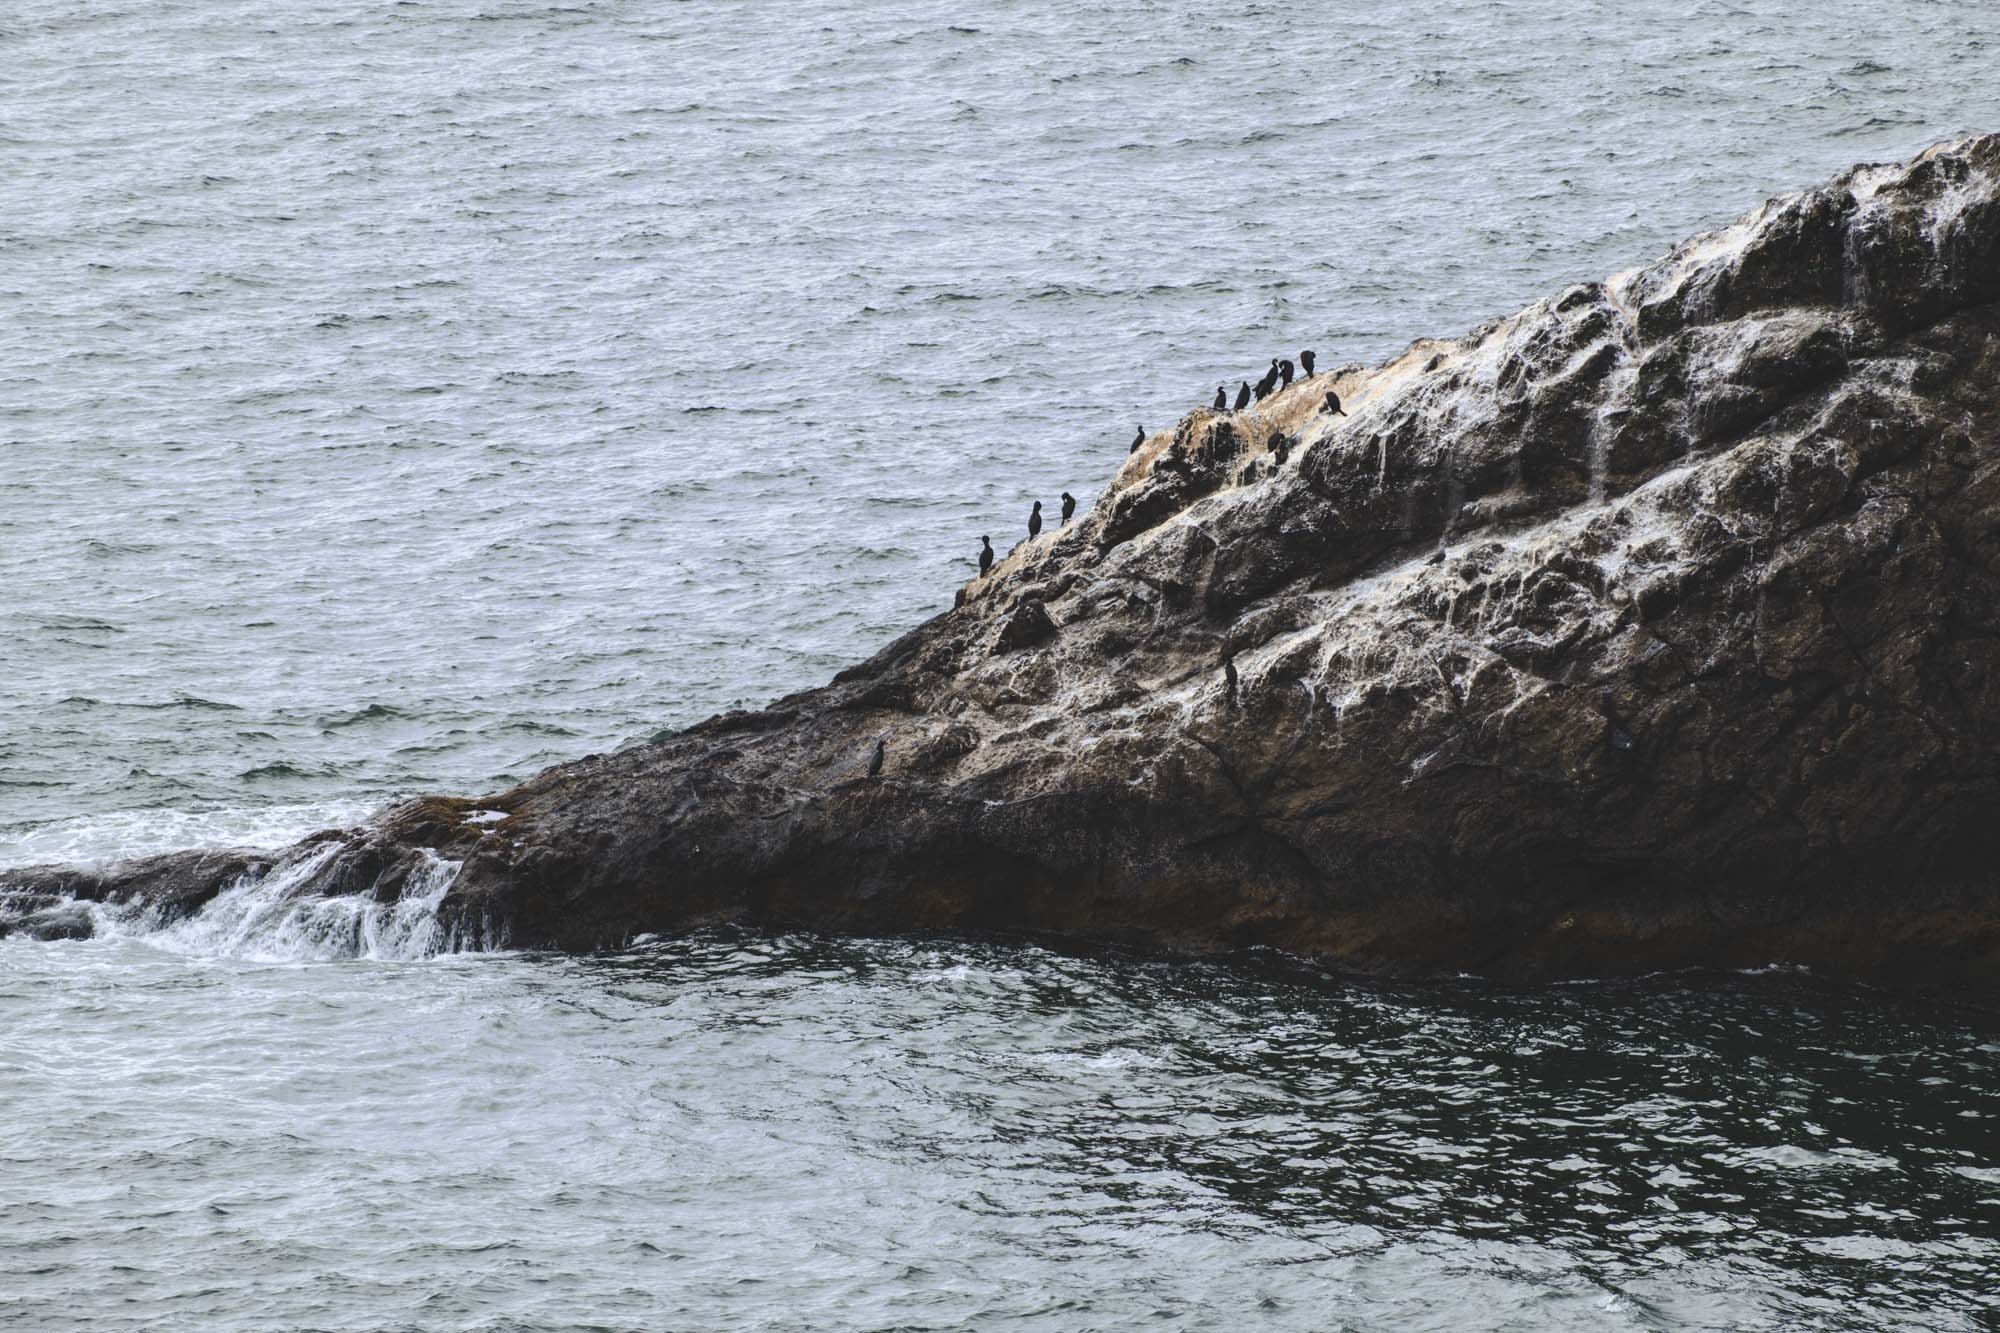 Birds and cliff face at Cape Disappointment, WA